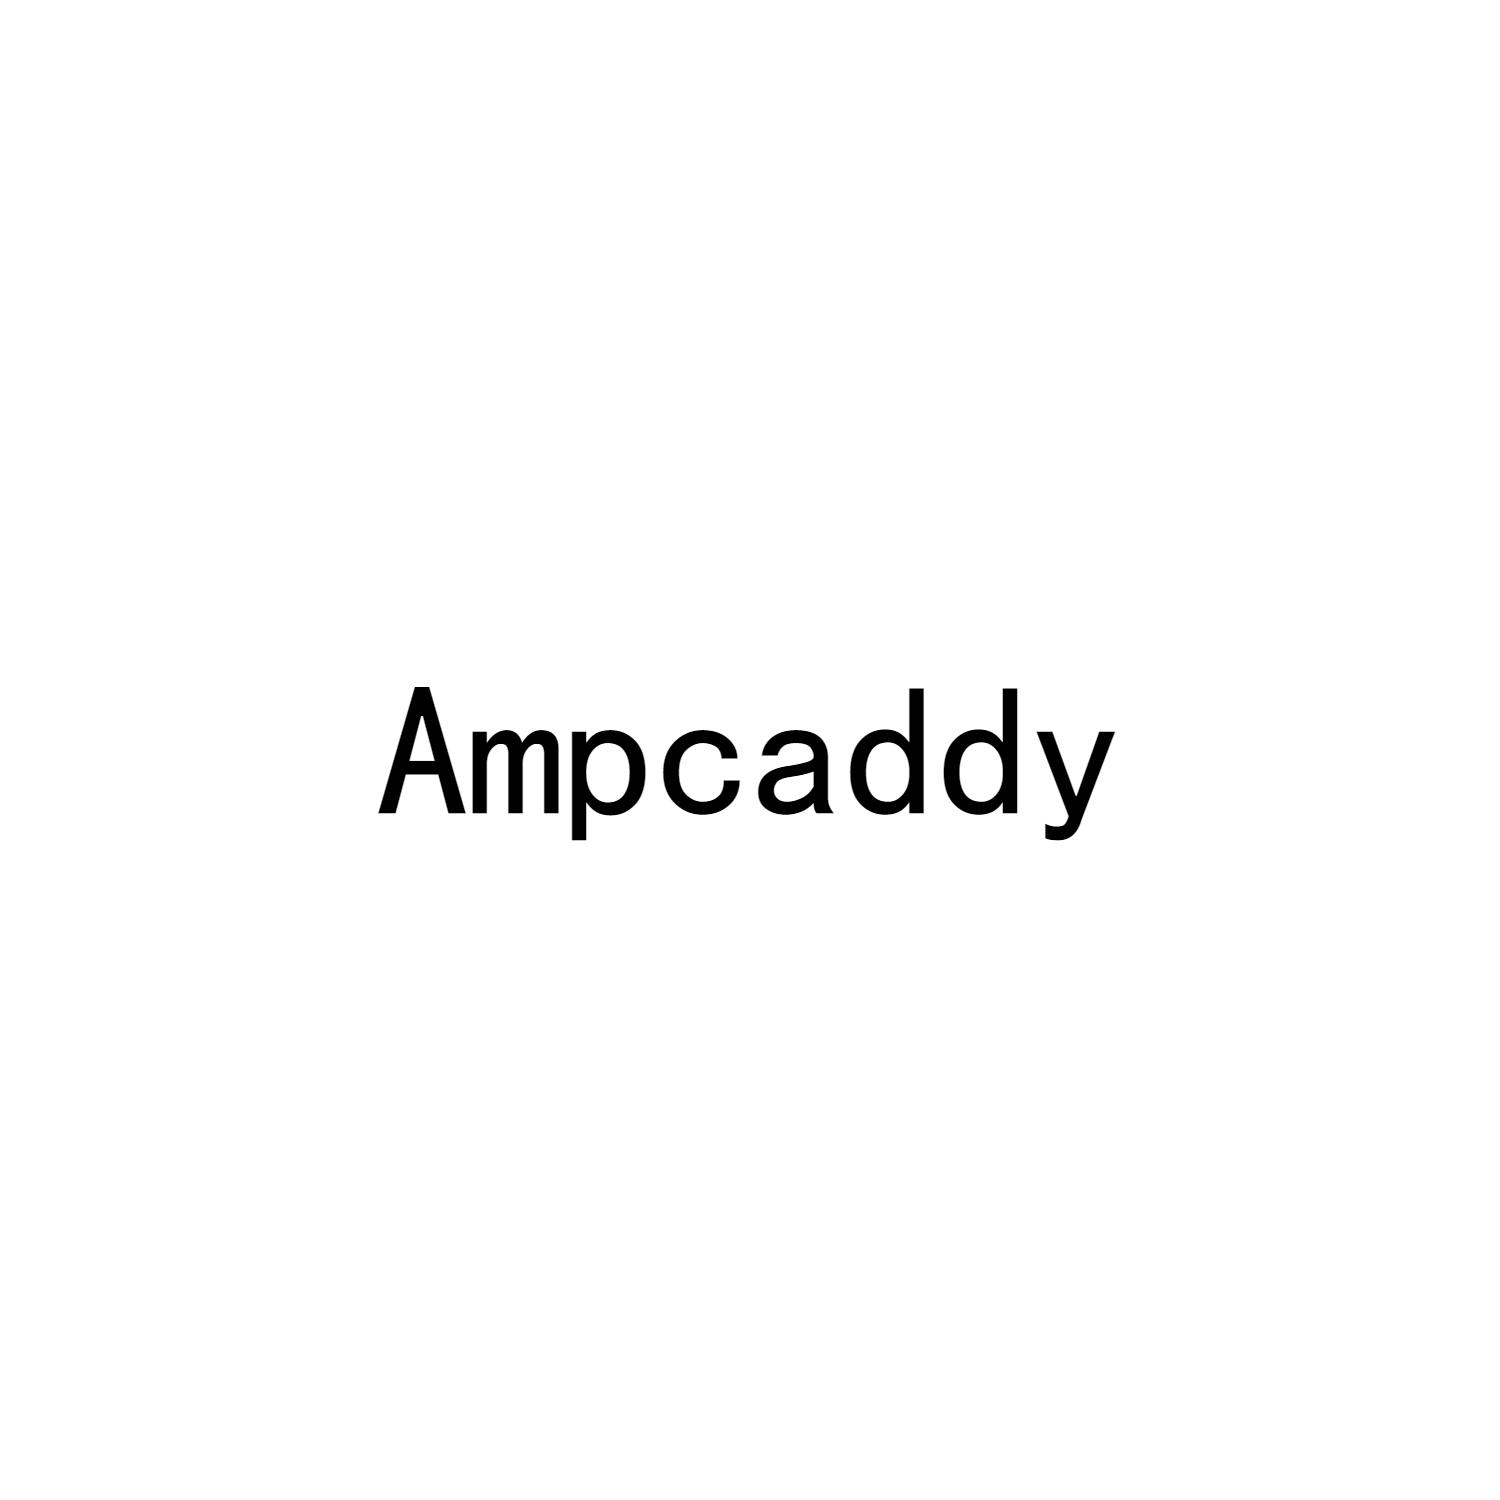 AMPCADDY